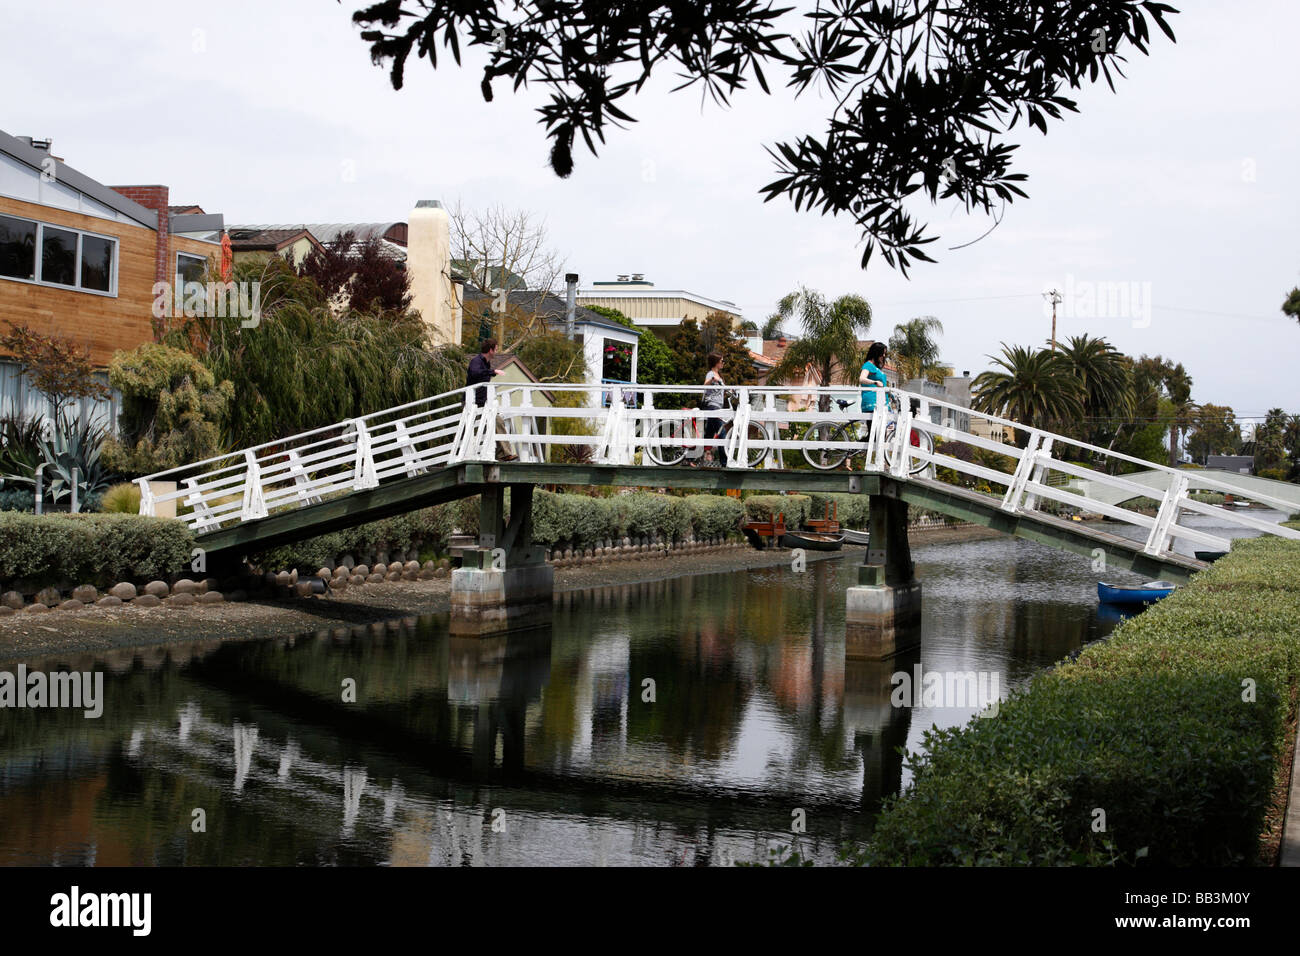 people crossing the wooden footbridge over sherman canal venice los angeles california usa Stock Photo